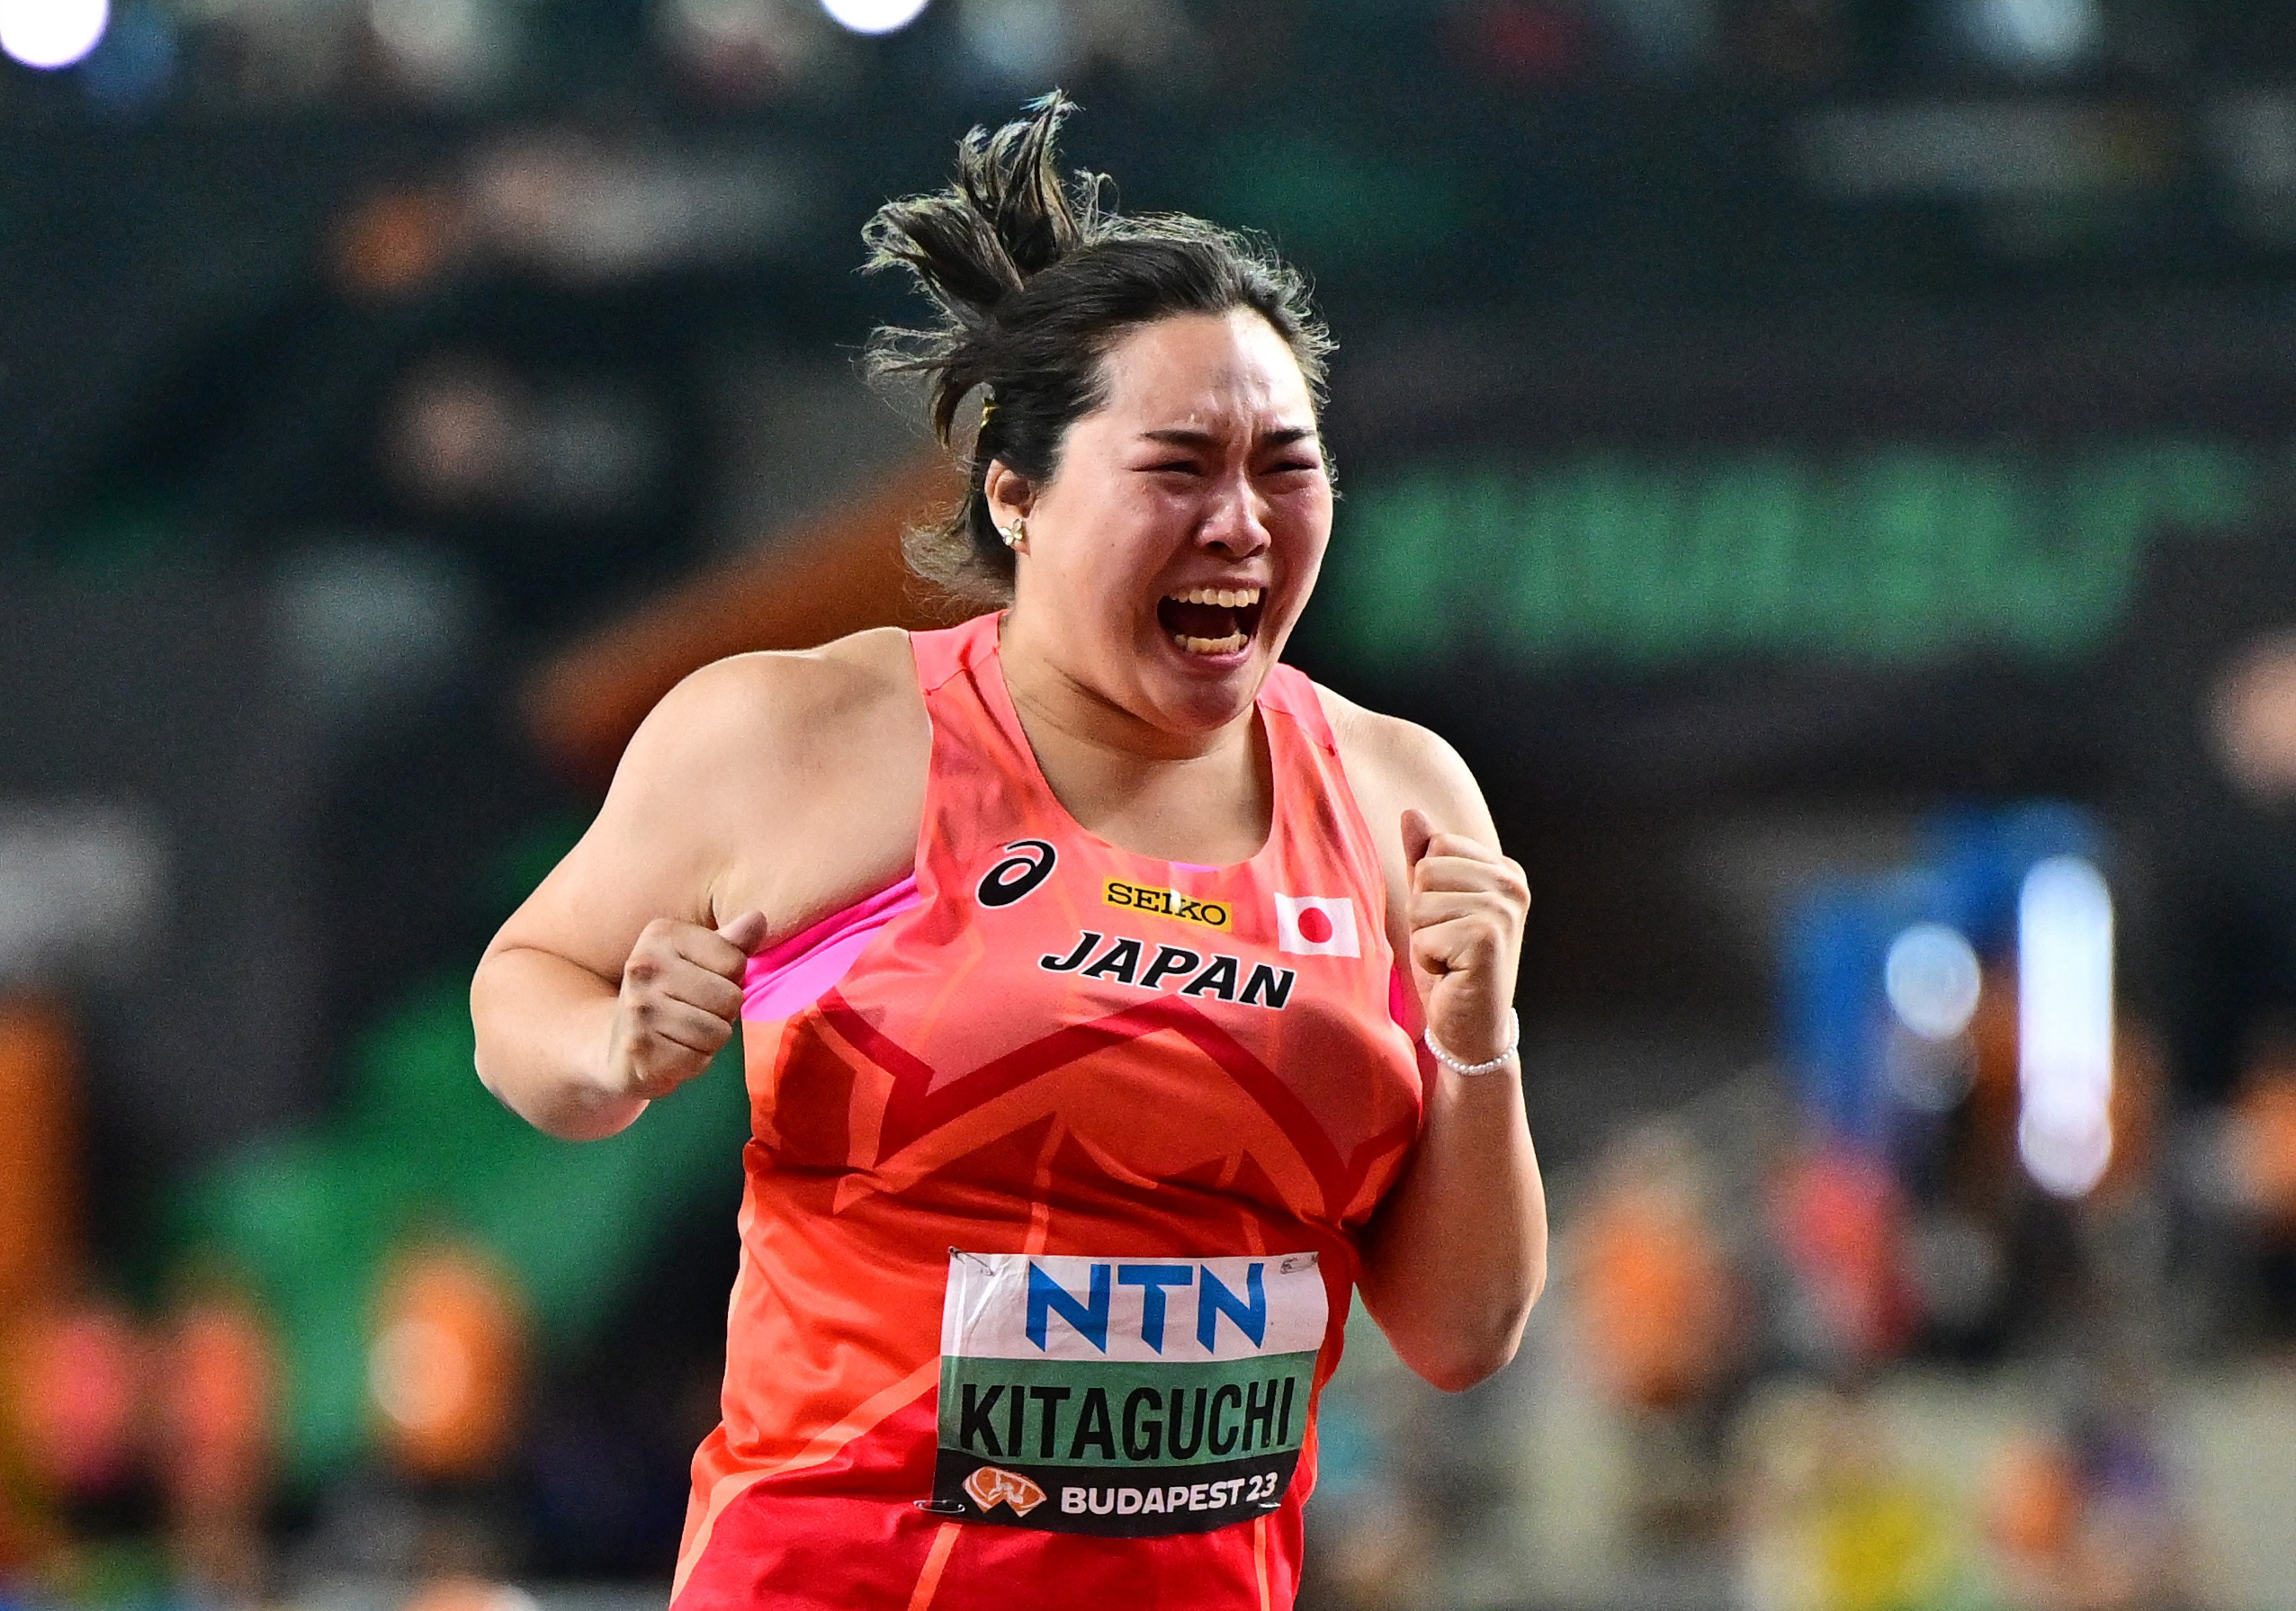 Japan's Kitaguchi takes javelin gold with her last throw